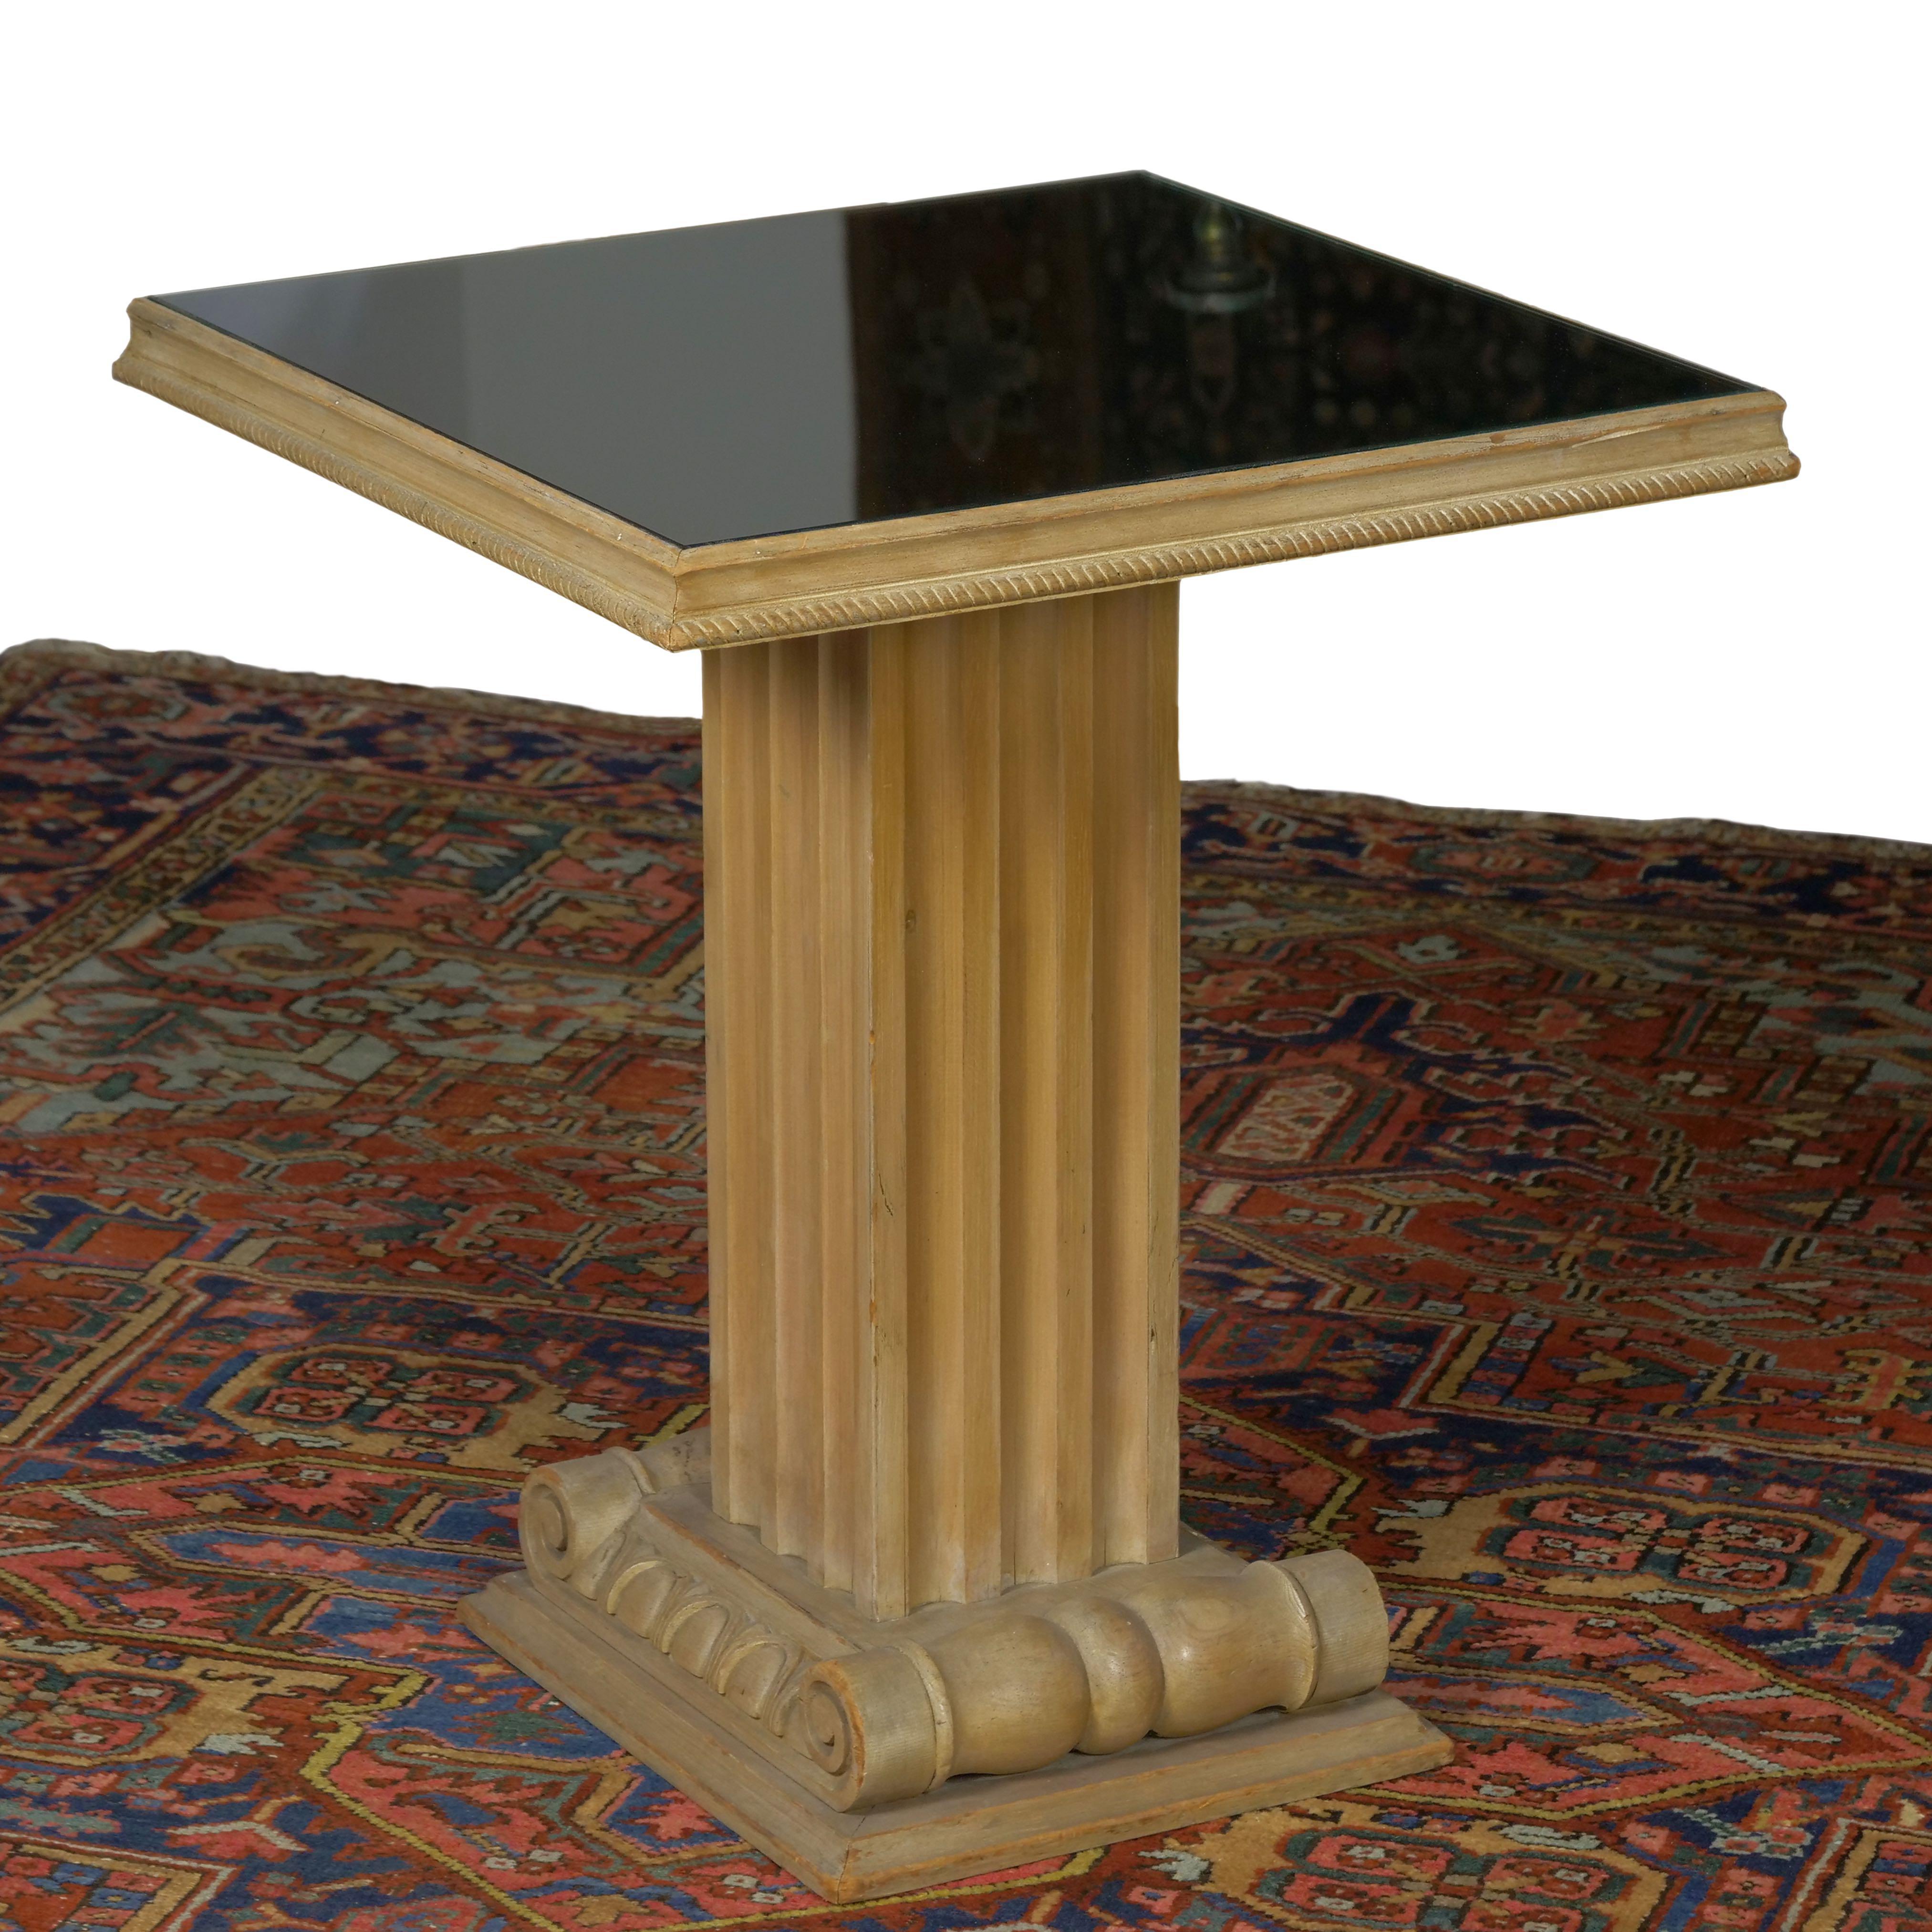 FRENCH MODERNE CERUSED WOOD PEDESTAL END TABLE WITH MIRRORED TOP
Circa mid 20th century, unmarked
Item # 905PNS31L 

A delightful little accent table designed in the French taste with a distinctly deco flair, the architectural fluted column is